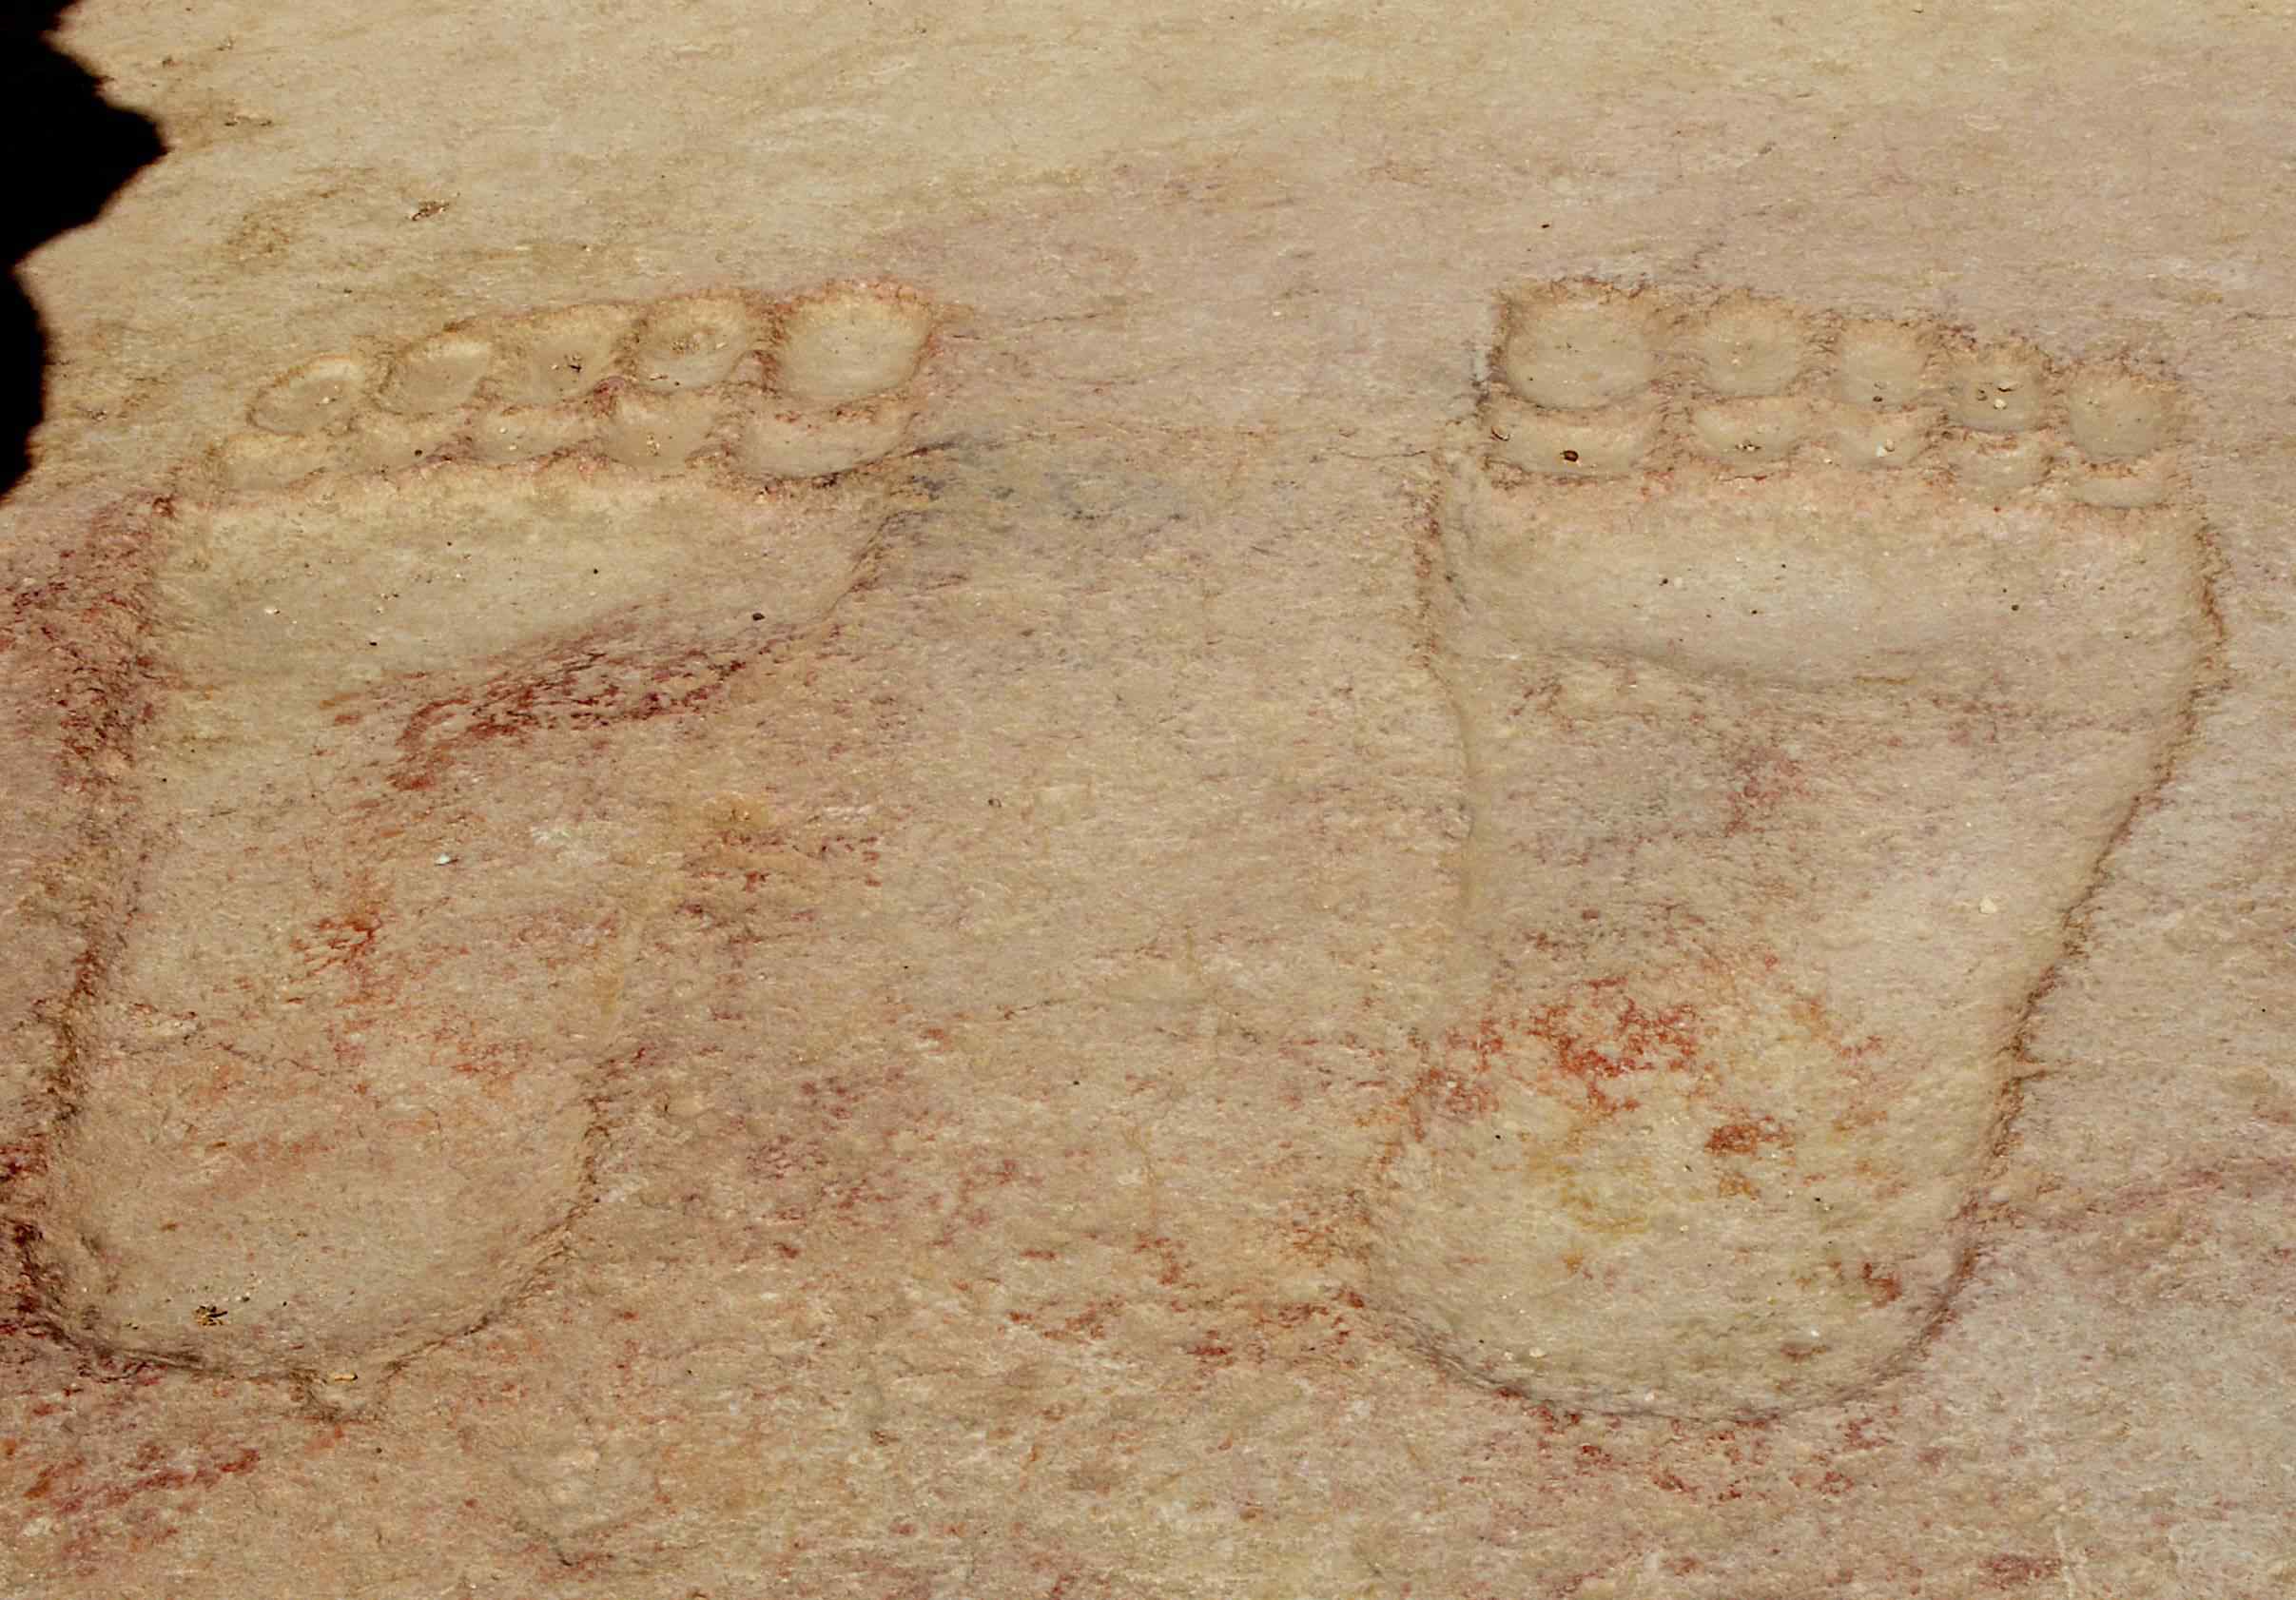 Giant footprints in the Ain Dara temple, Aleppo, Syria. © Image Credit: Sergey Mayorov | Licenced from DreamsTime Stock Photos (ID:108806046)